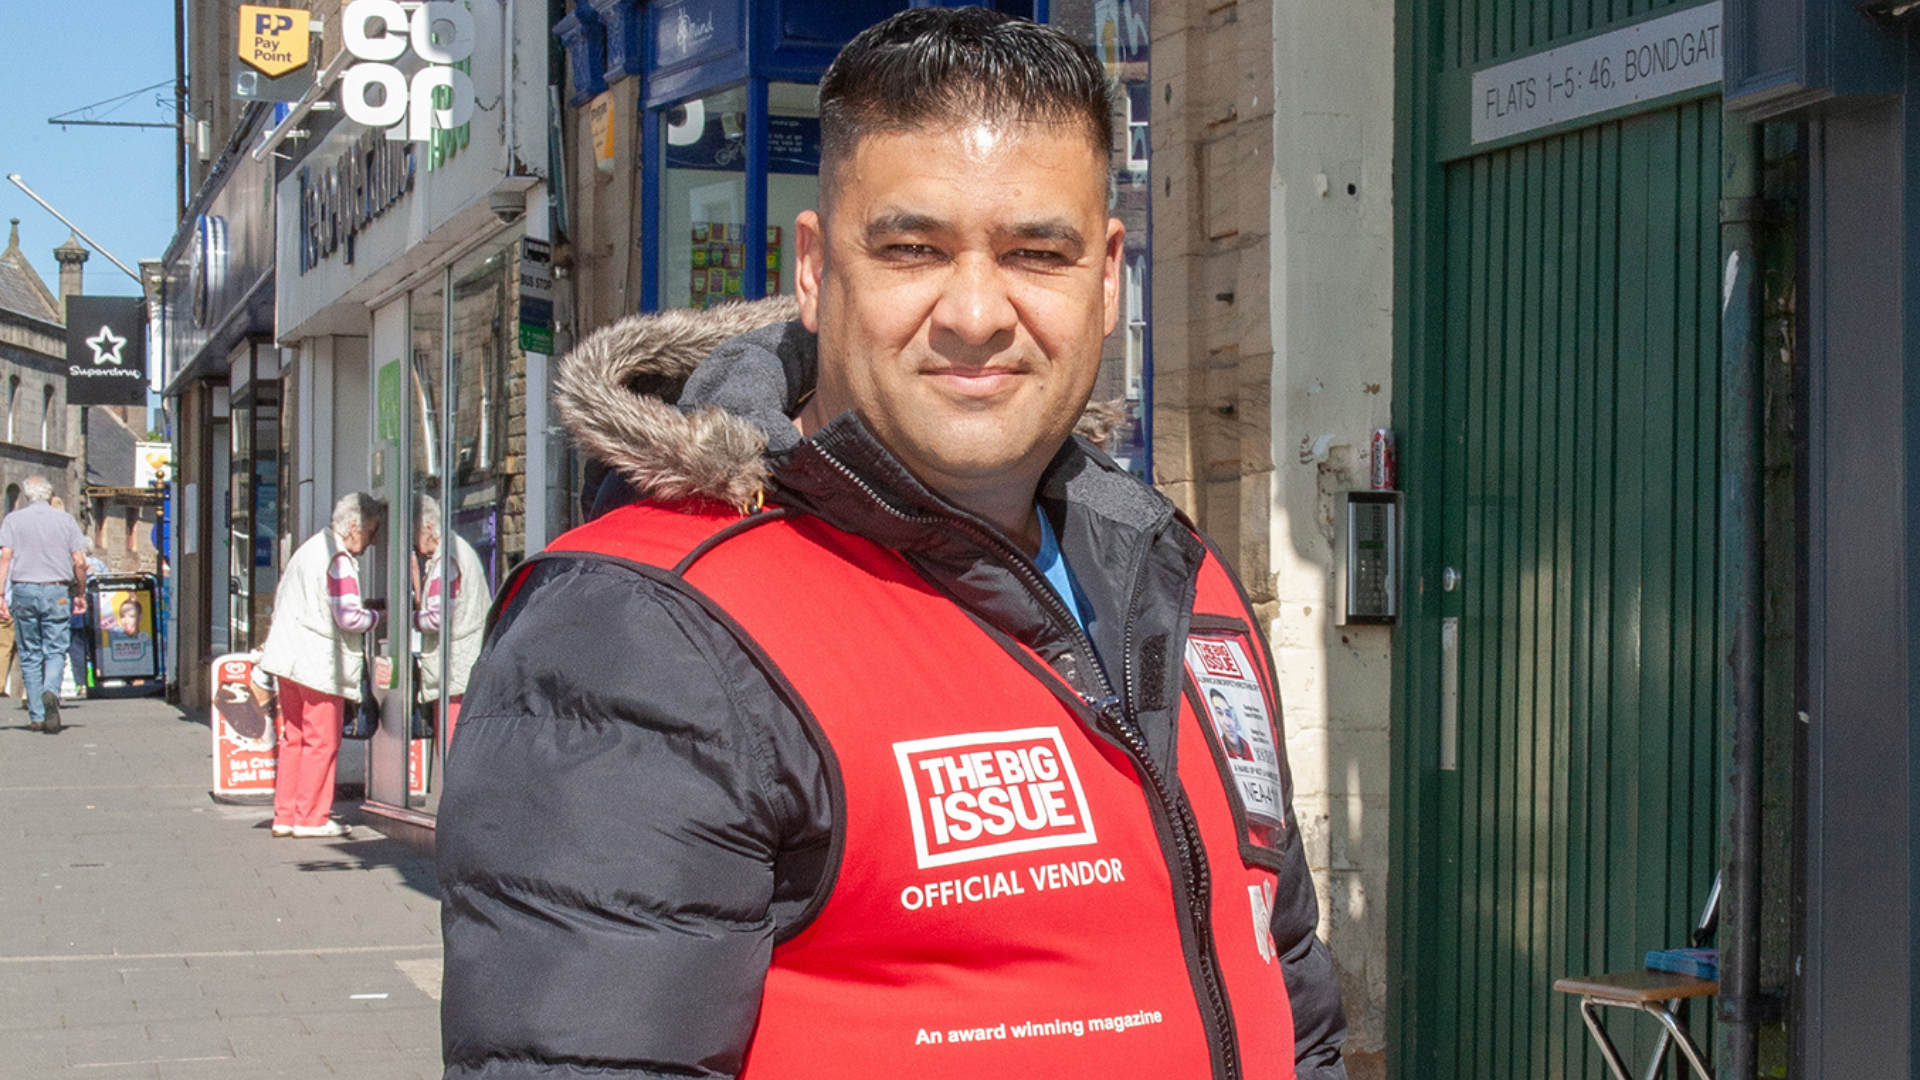 " In the last few months I received settled status for me and my family and I am very, very happy. I feel my future is OK," says Big Issue vendor Pedra.